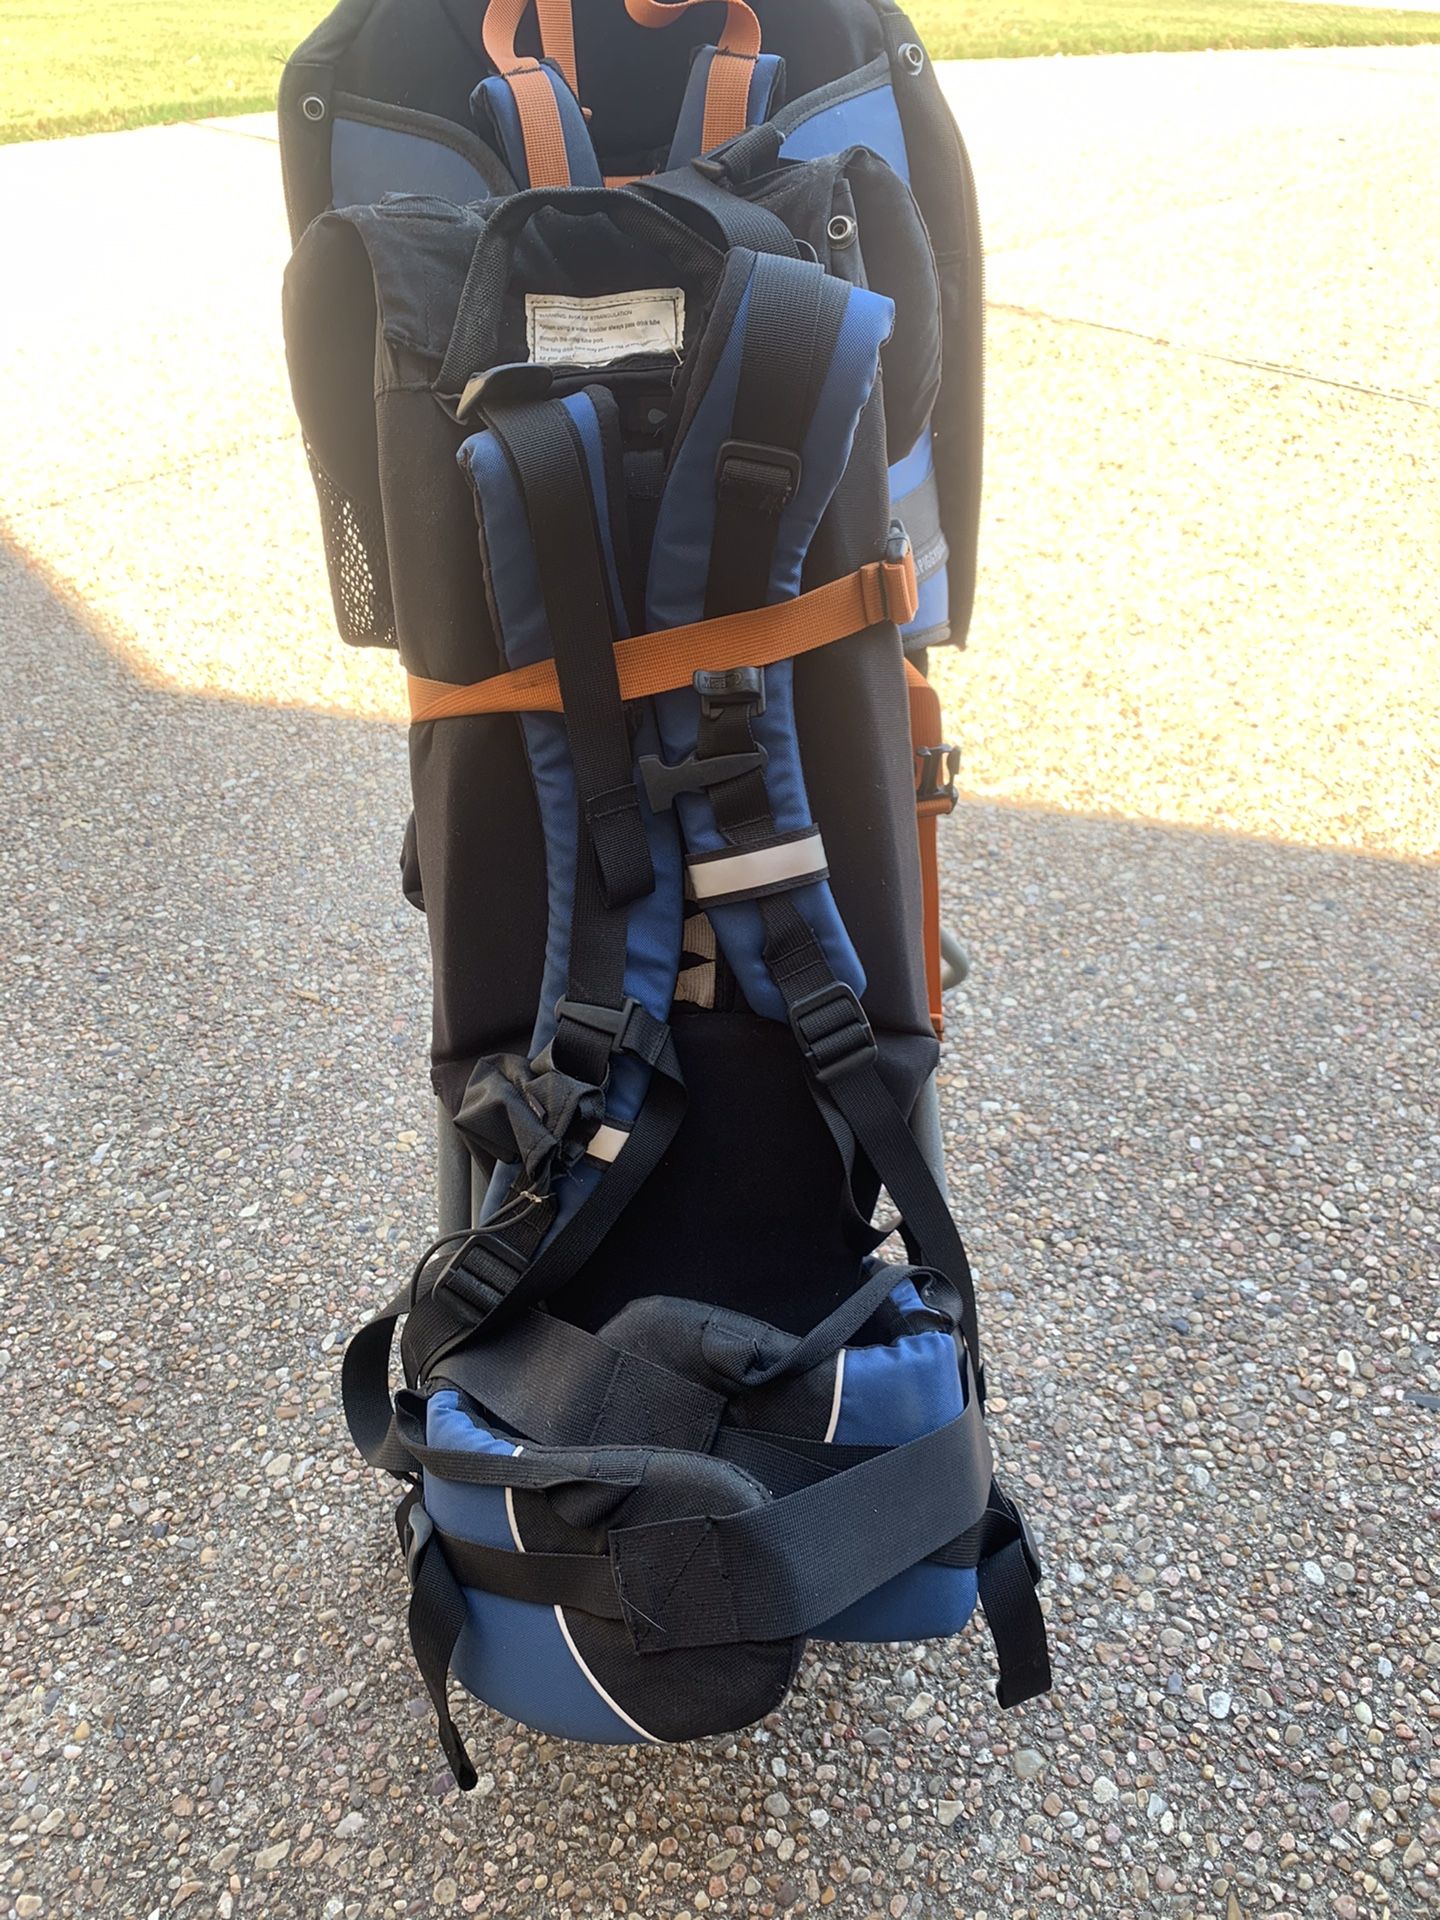 REI backpack child carrier